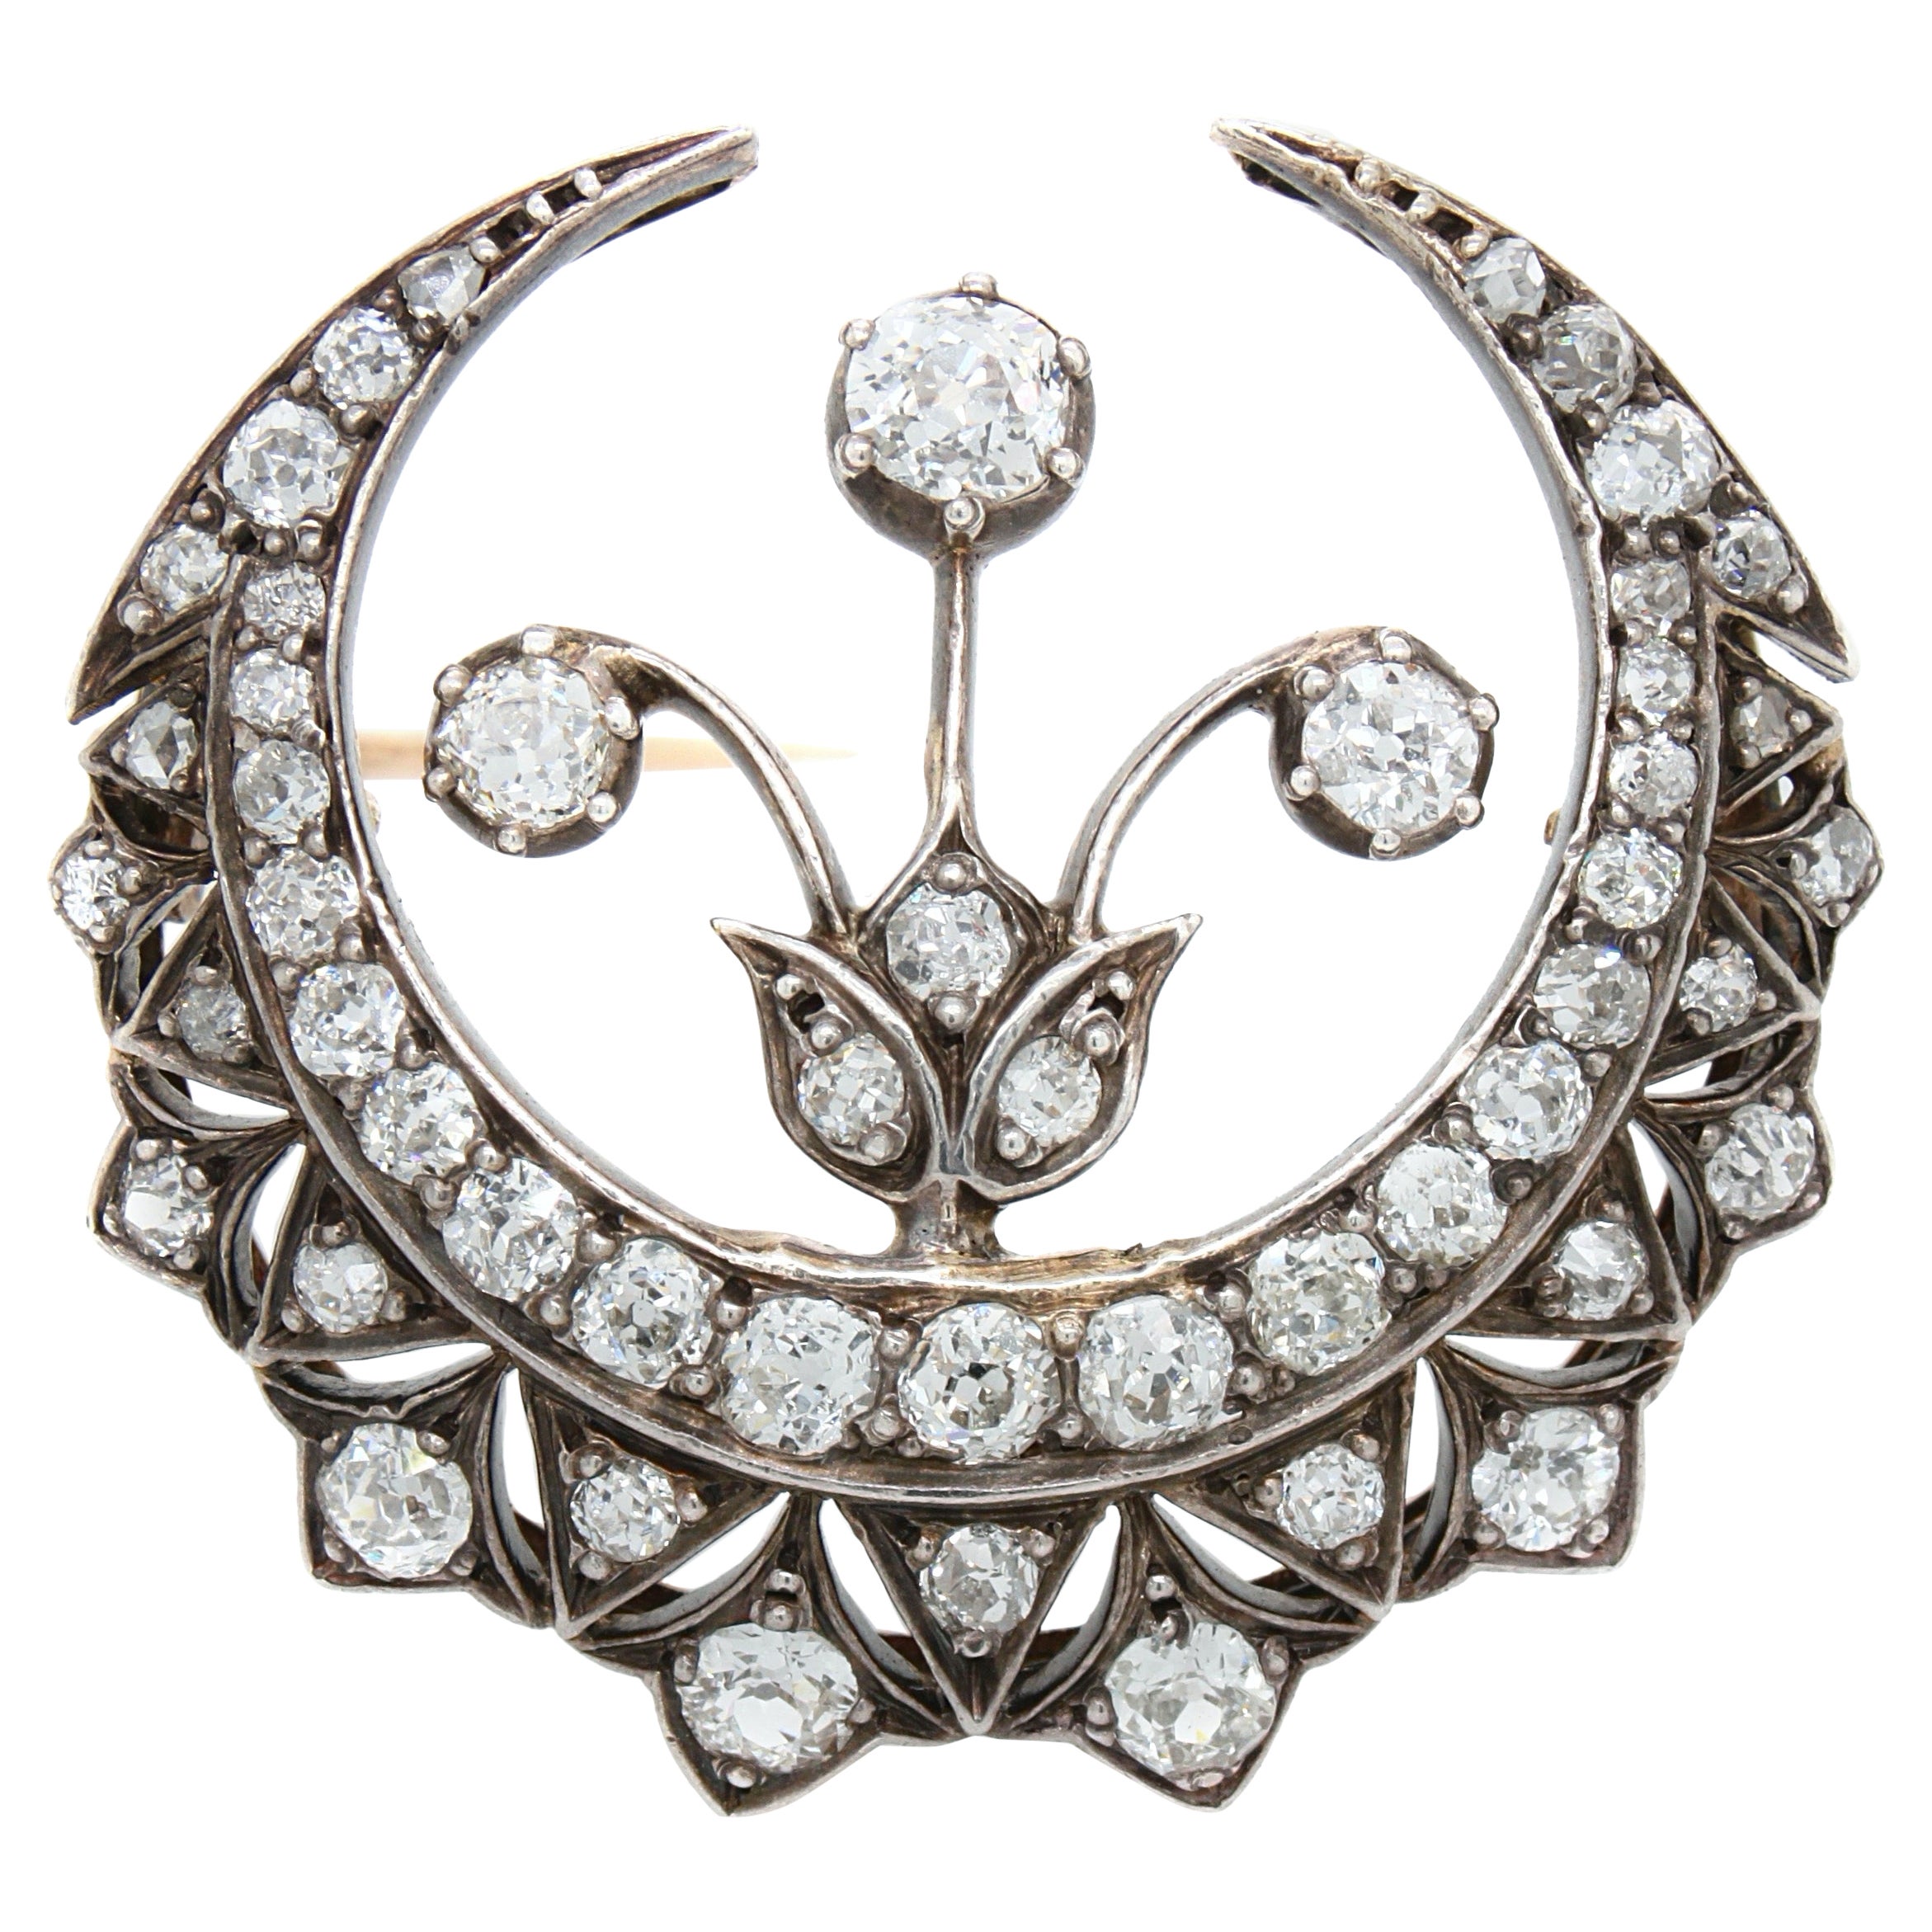 Diamond Crescent and Flower Brooch, Victorian, ca. 1880s